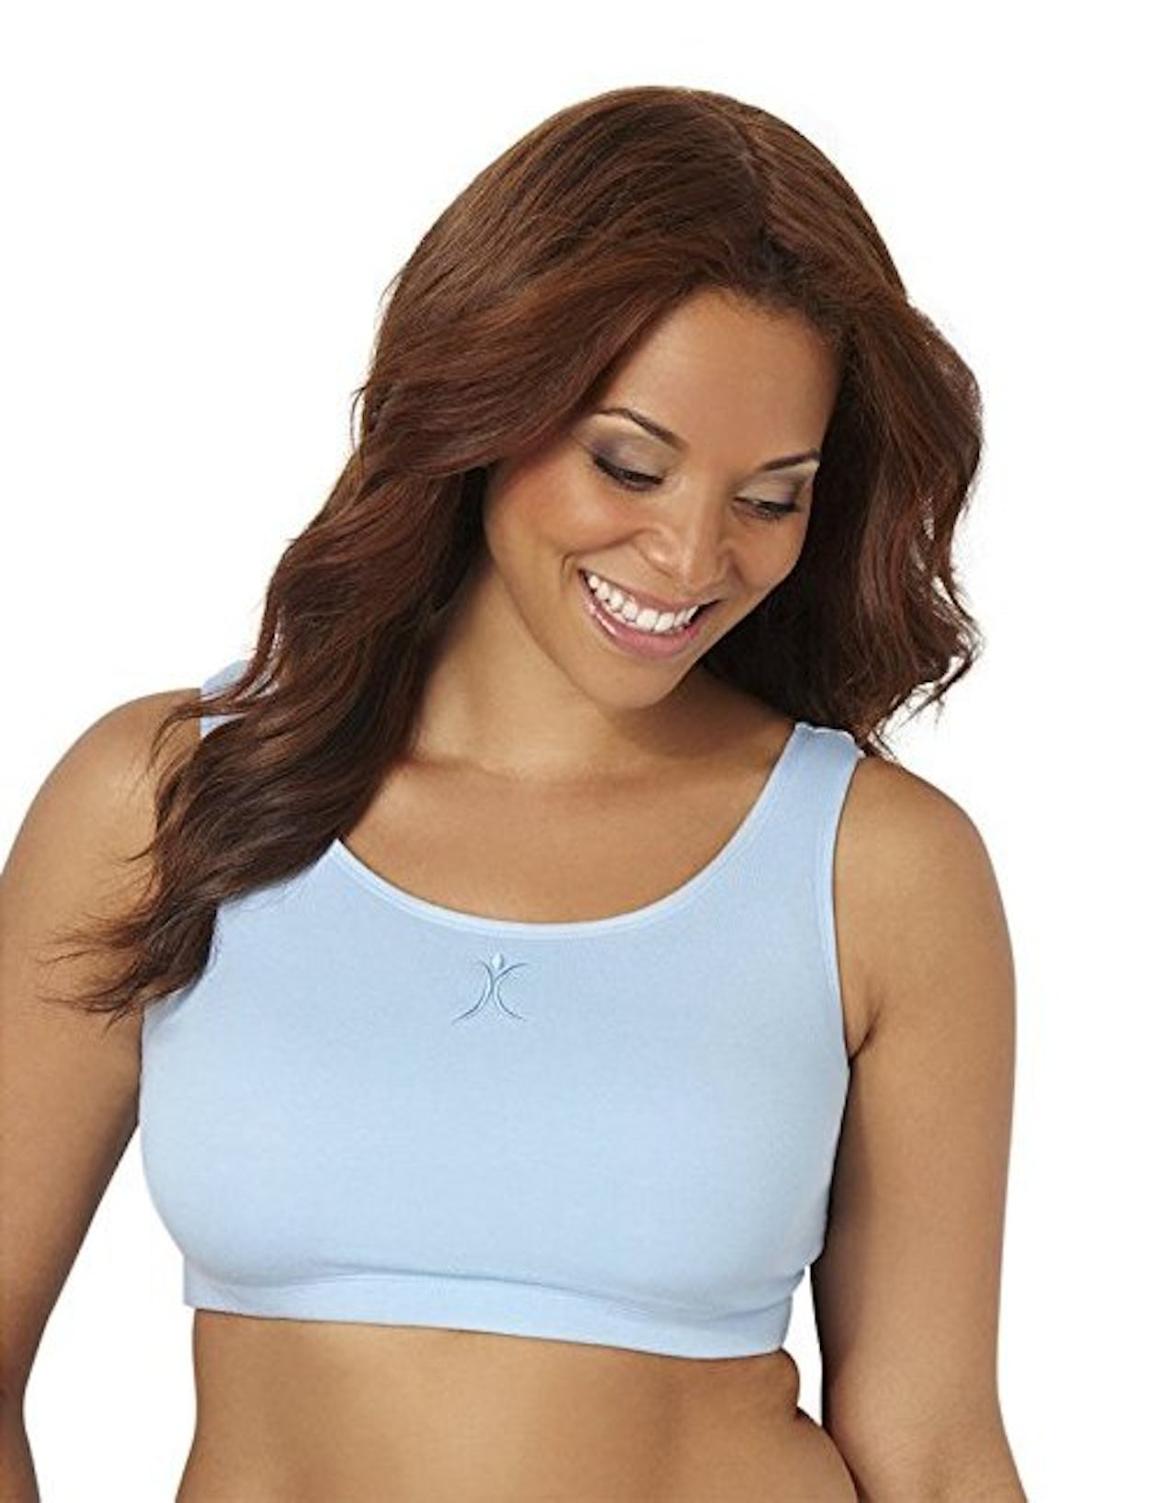 How Do Different Types Of Sports Bras Provide Support And Comfort?